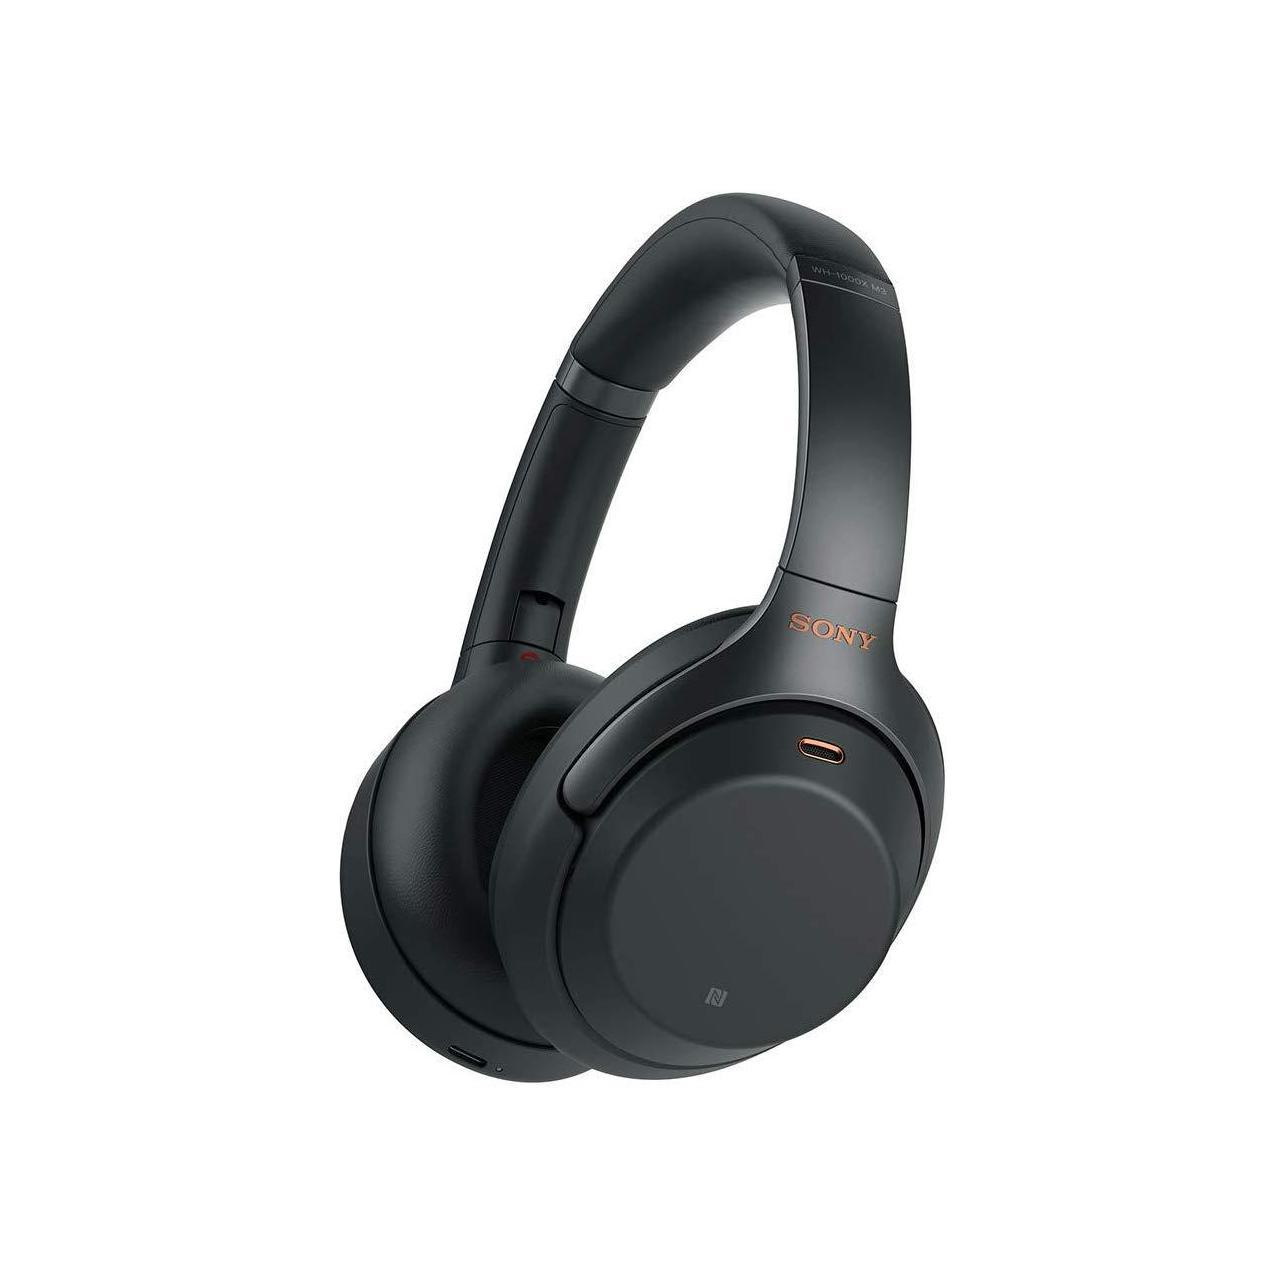 Sony WH-1000XM3 noise-cancelling headphones drop to lowest price